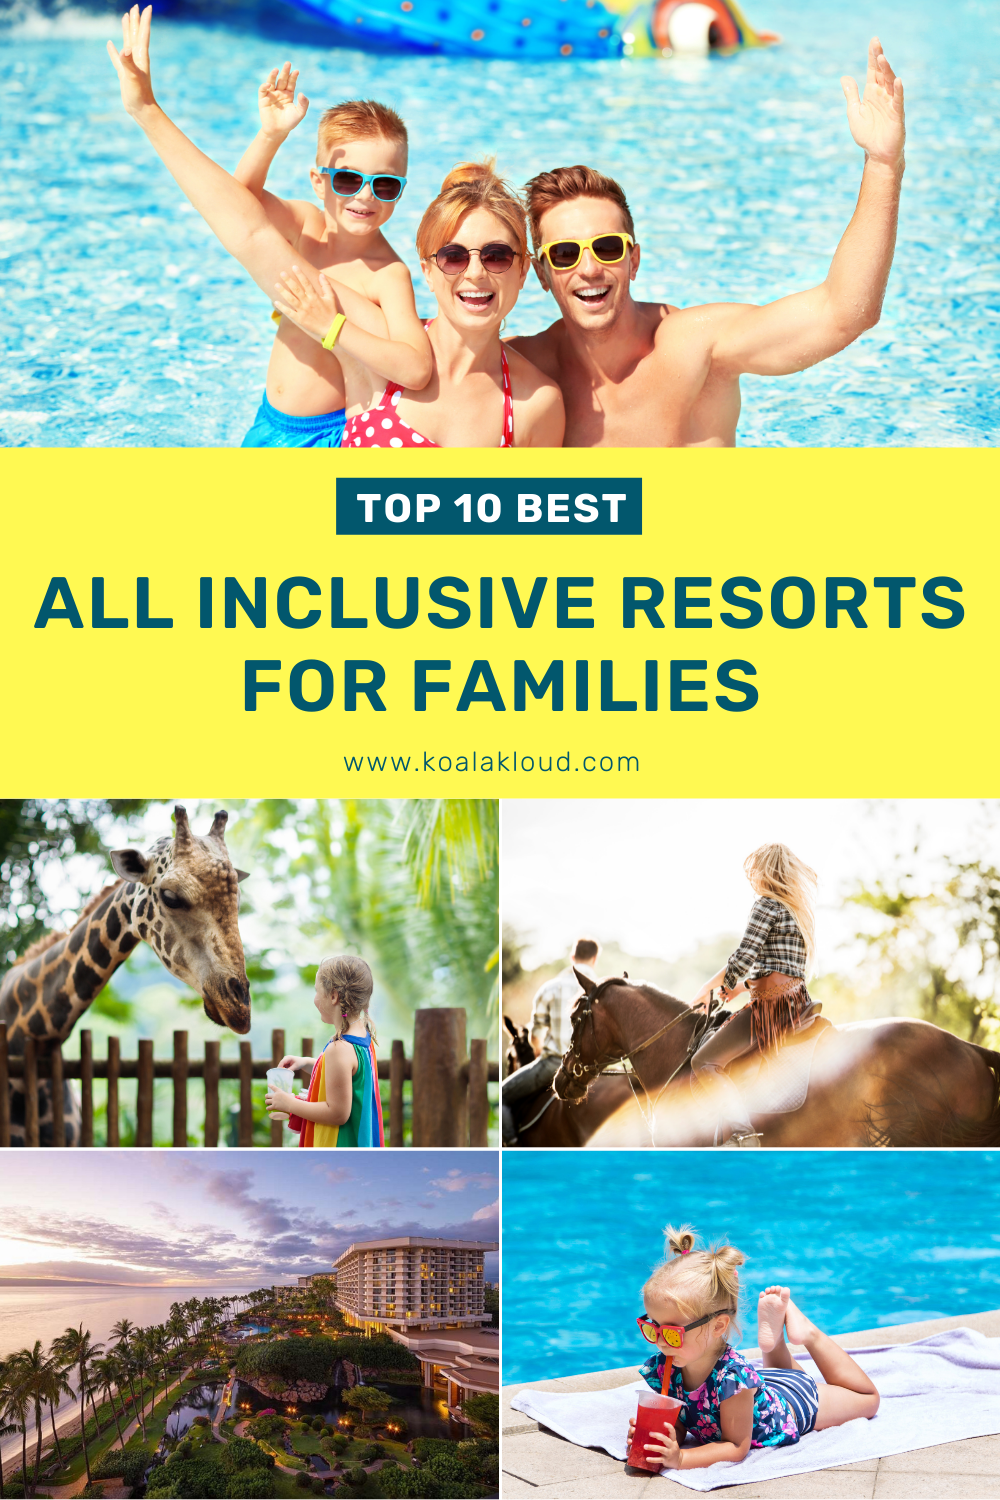 10 Best All Inclusive Resorts For Families 2022